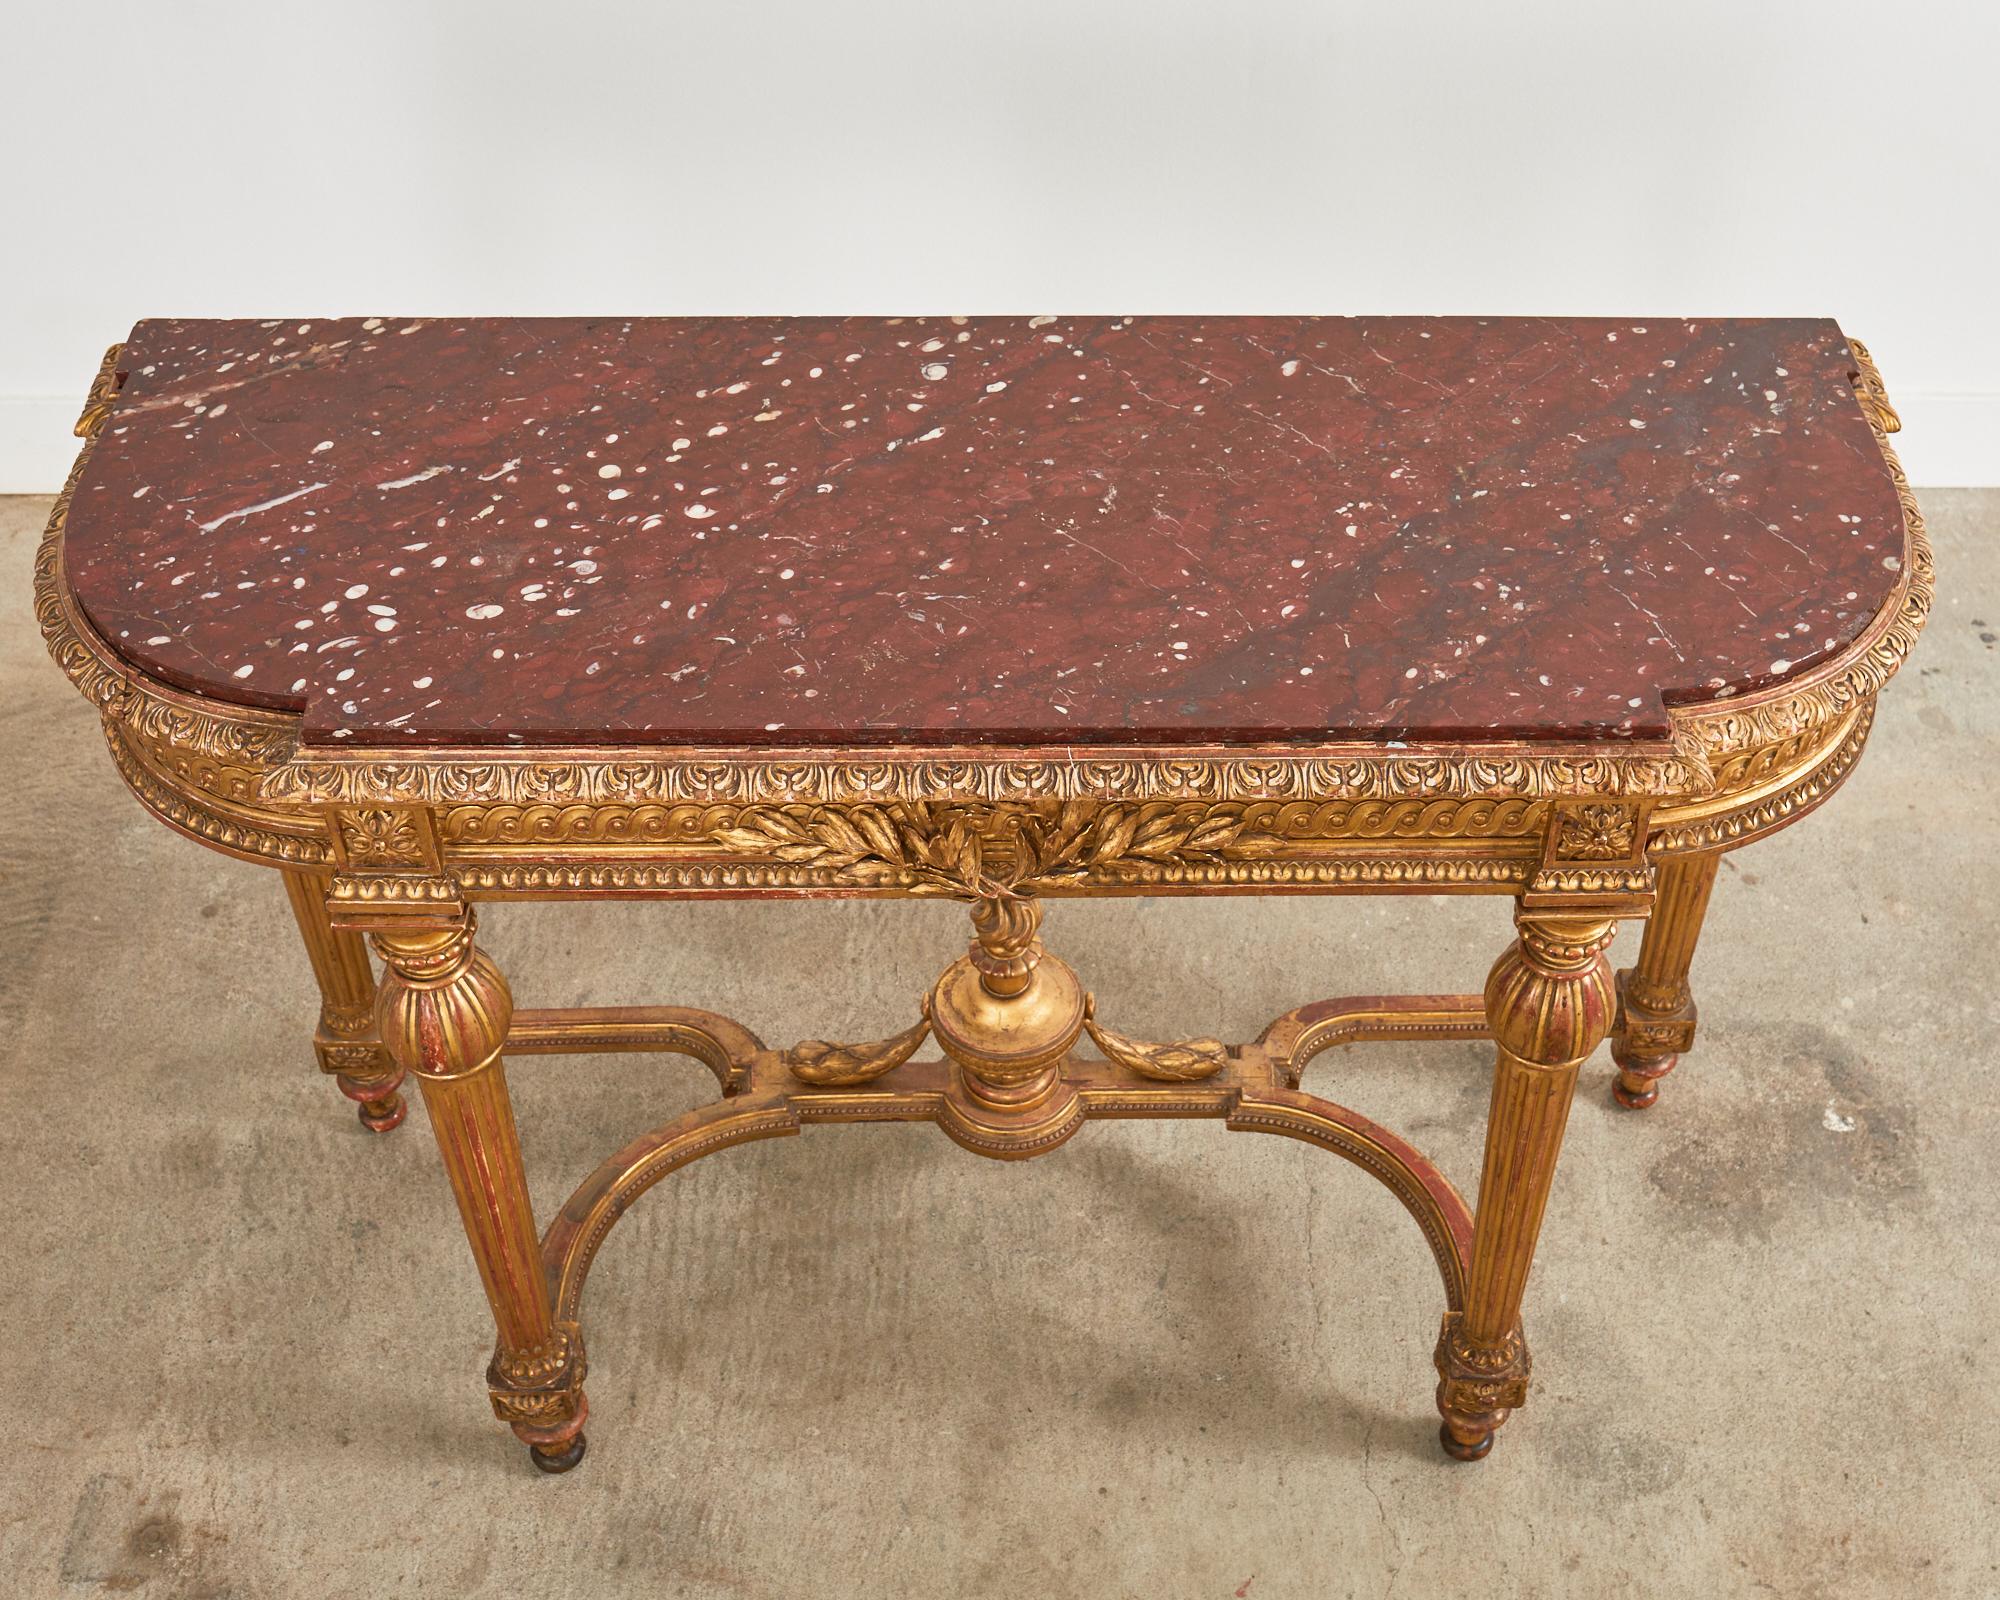 19th Century French Empire Neoclassical Marble Top Console Table In Good Condition For Sale In Rio Vista, CA